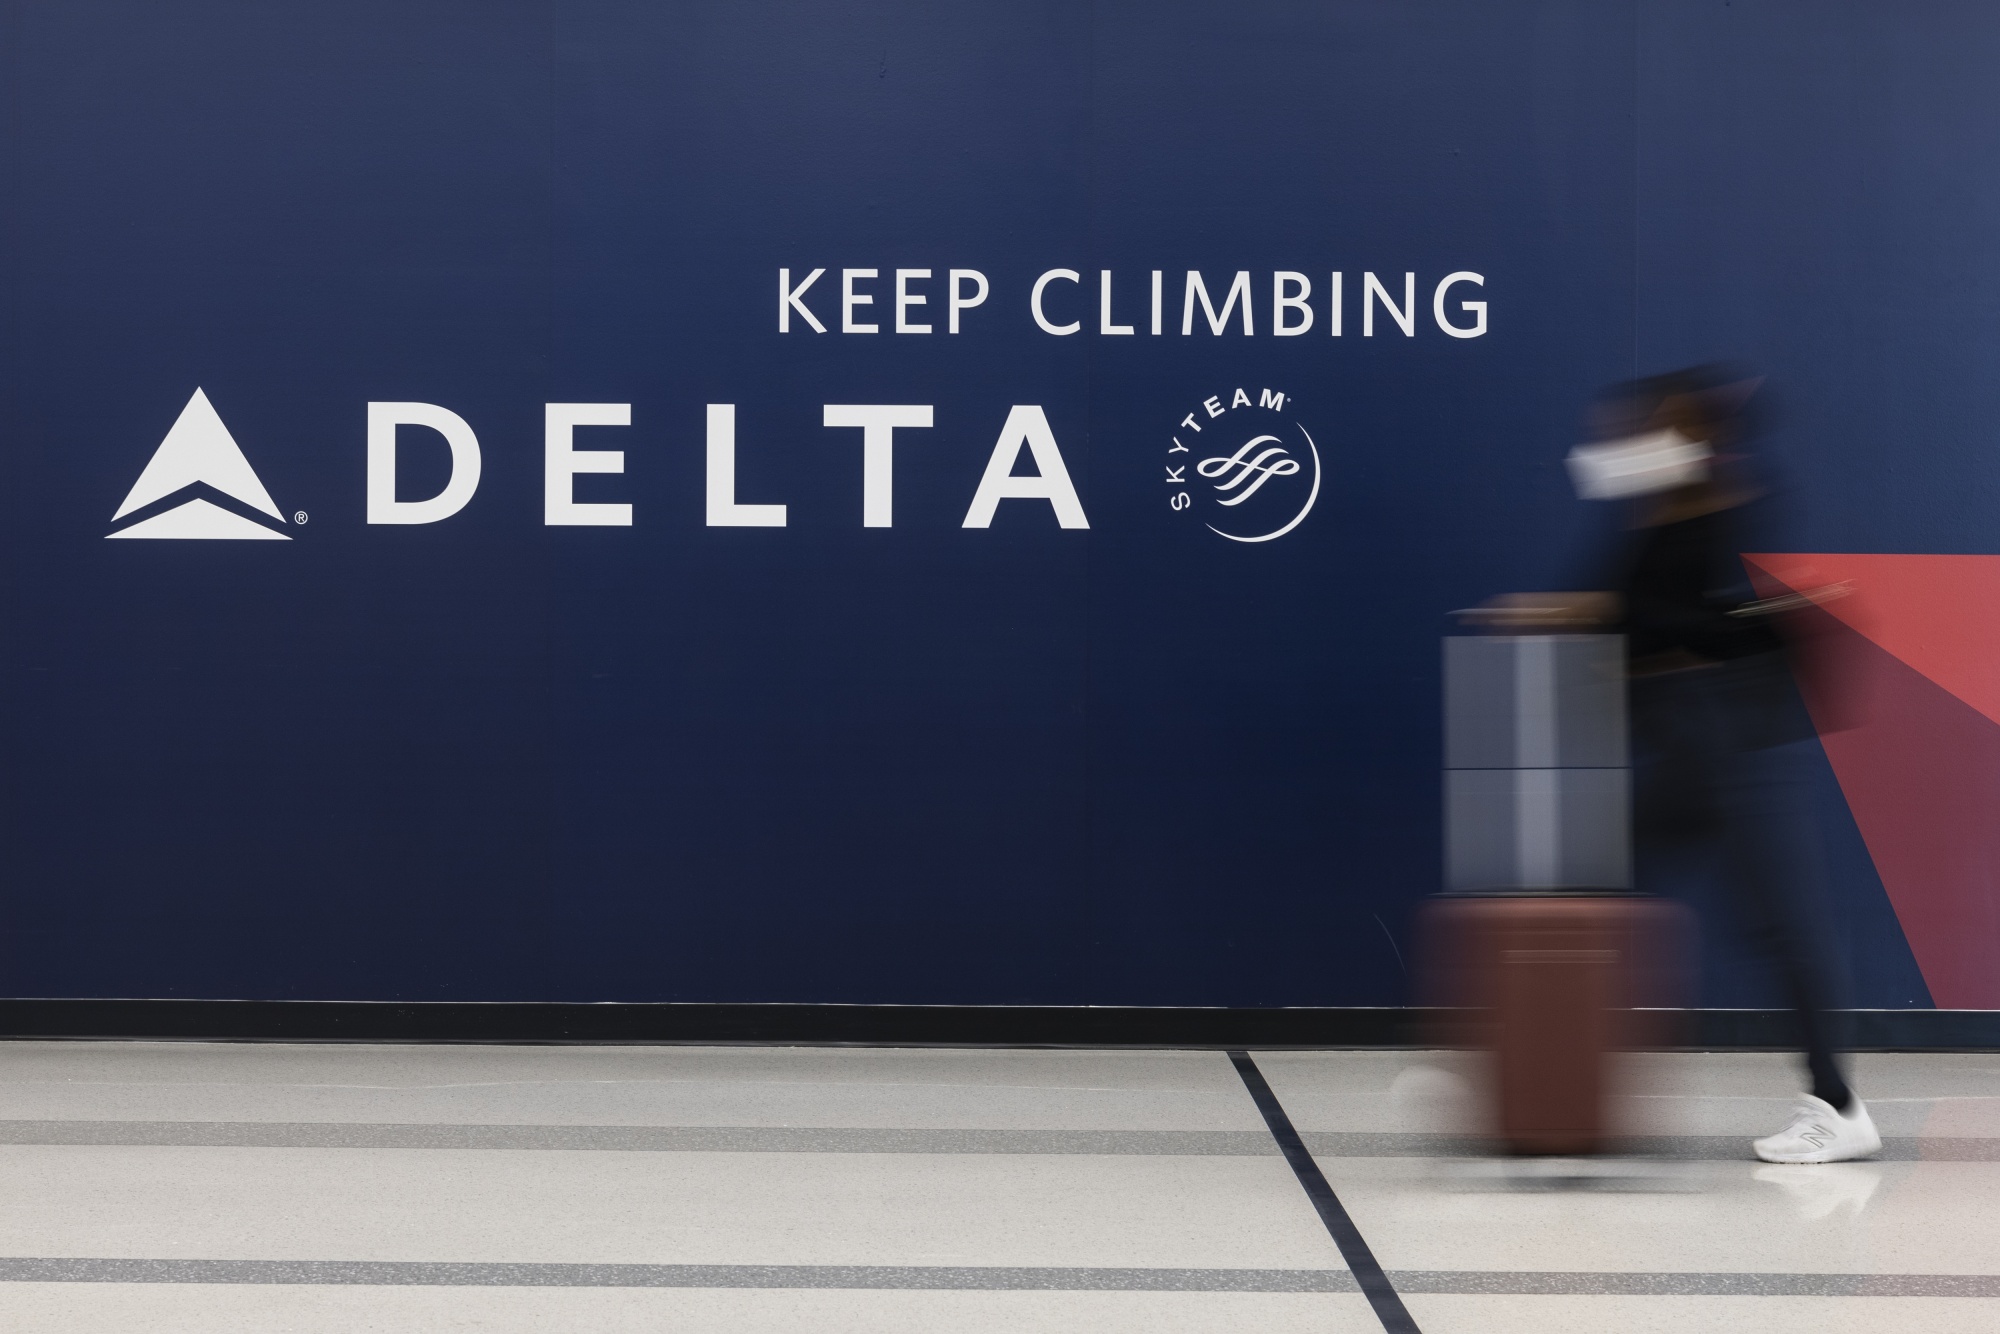 You Can Now Redeem SkyMiles For Delta Gift Cards - One Mile at a Time